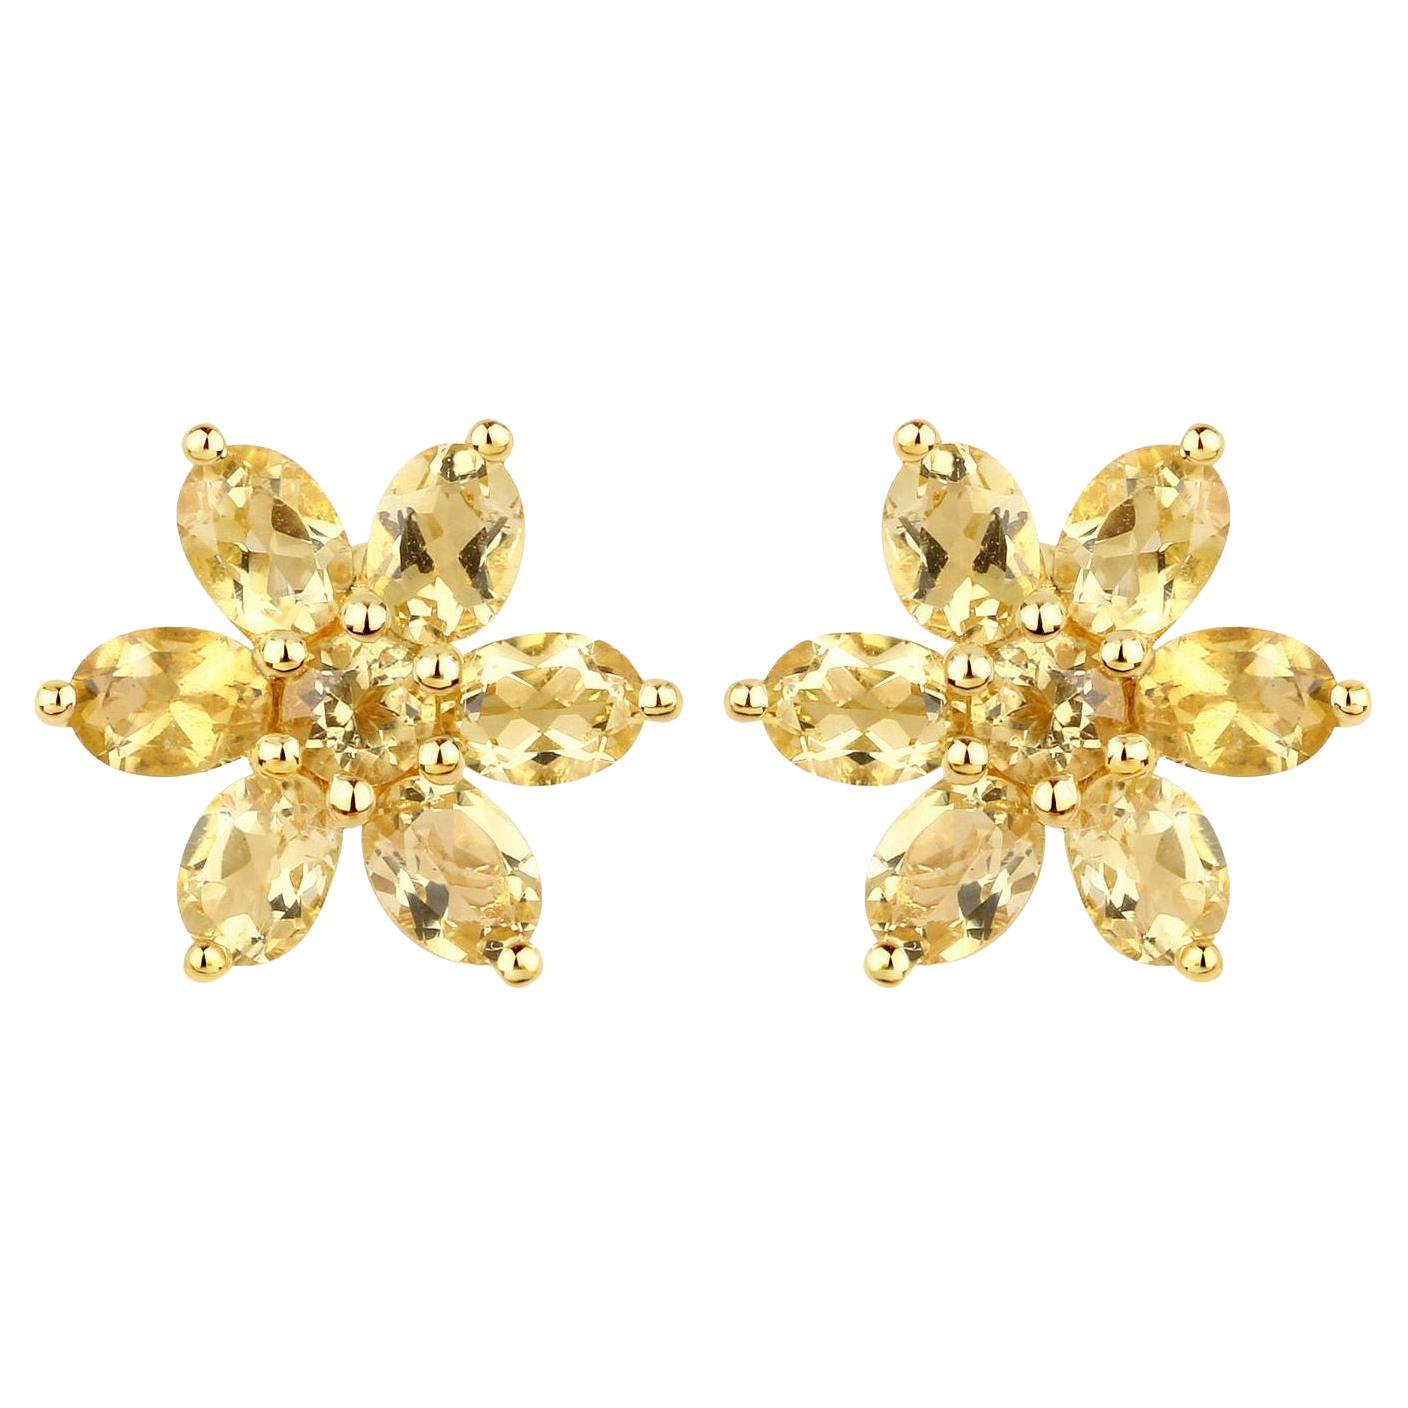 Citrine Floral Earrings 2.12 Carats Total 